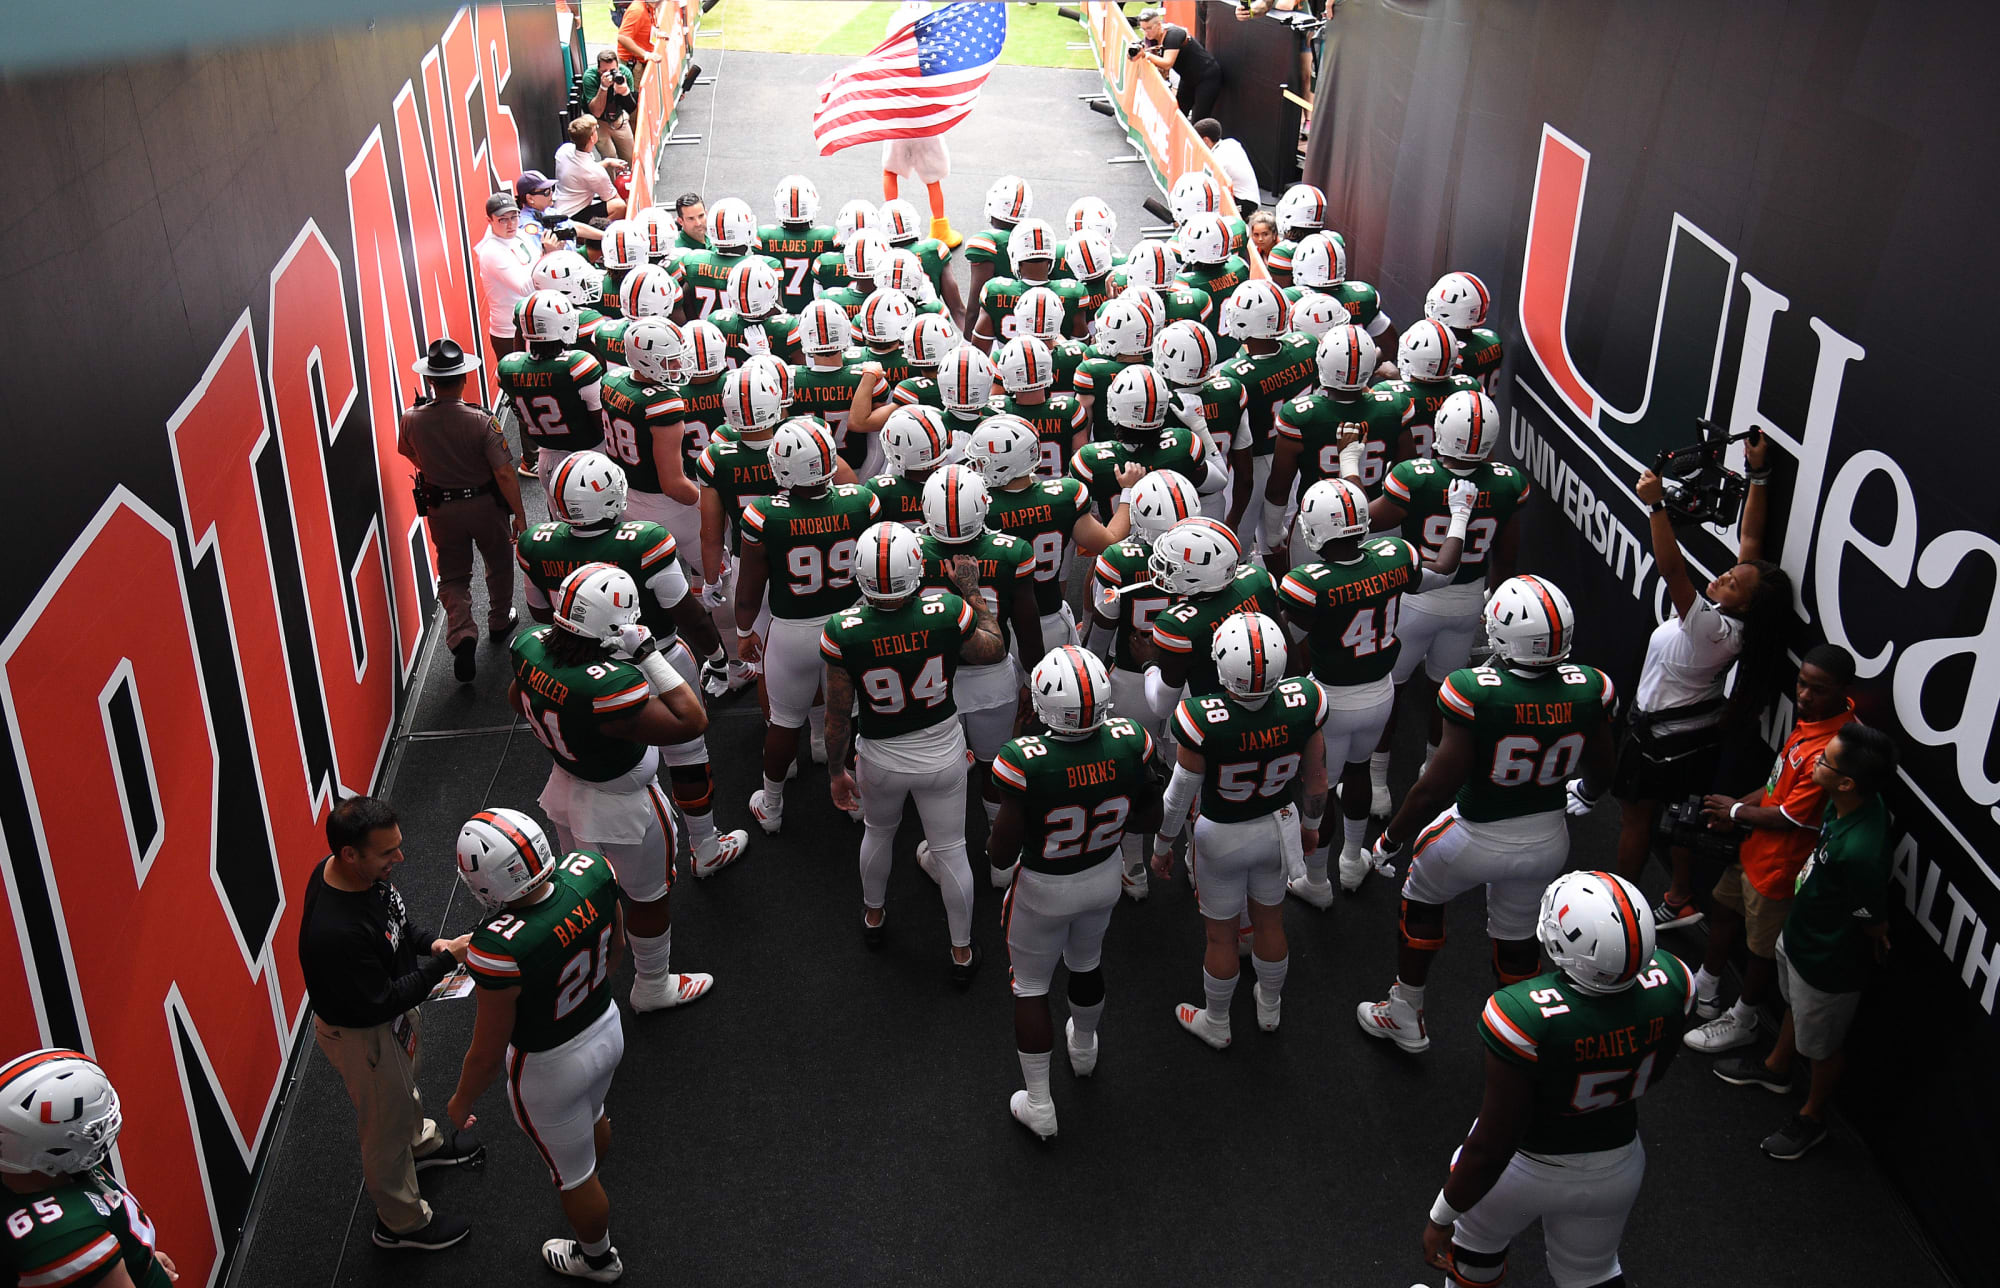 Miami Football 2022 Schedule Miami Football Schedules More Likely To Add Group Of 5, Fcs Than Power 5